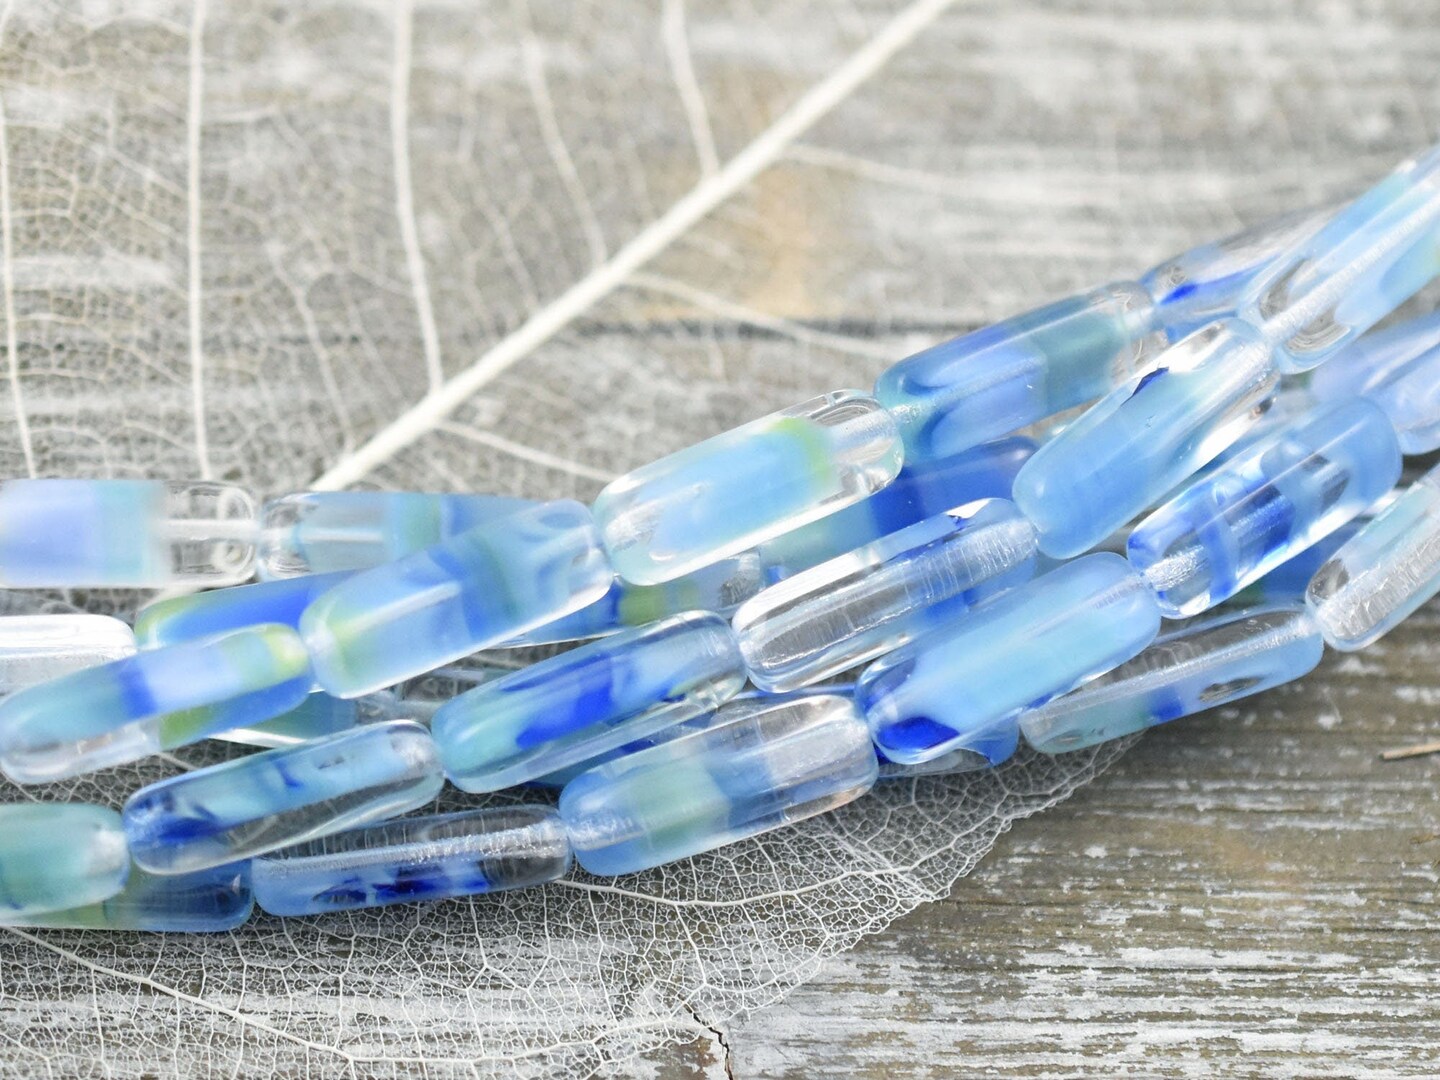 *14* 15x5mm Seebreeze Ocean Crystal Rectangle Tube Beads